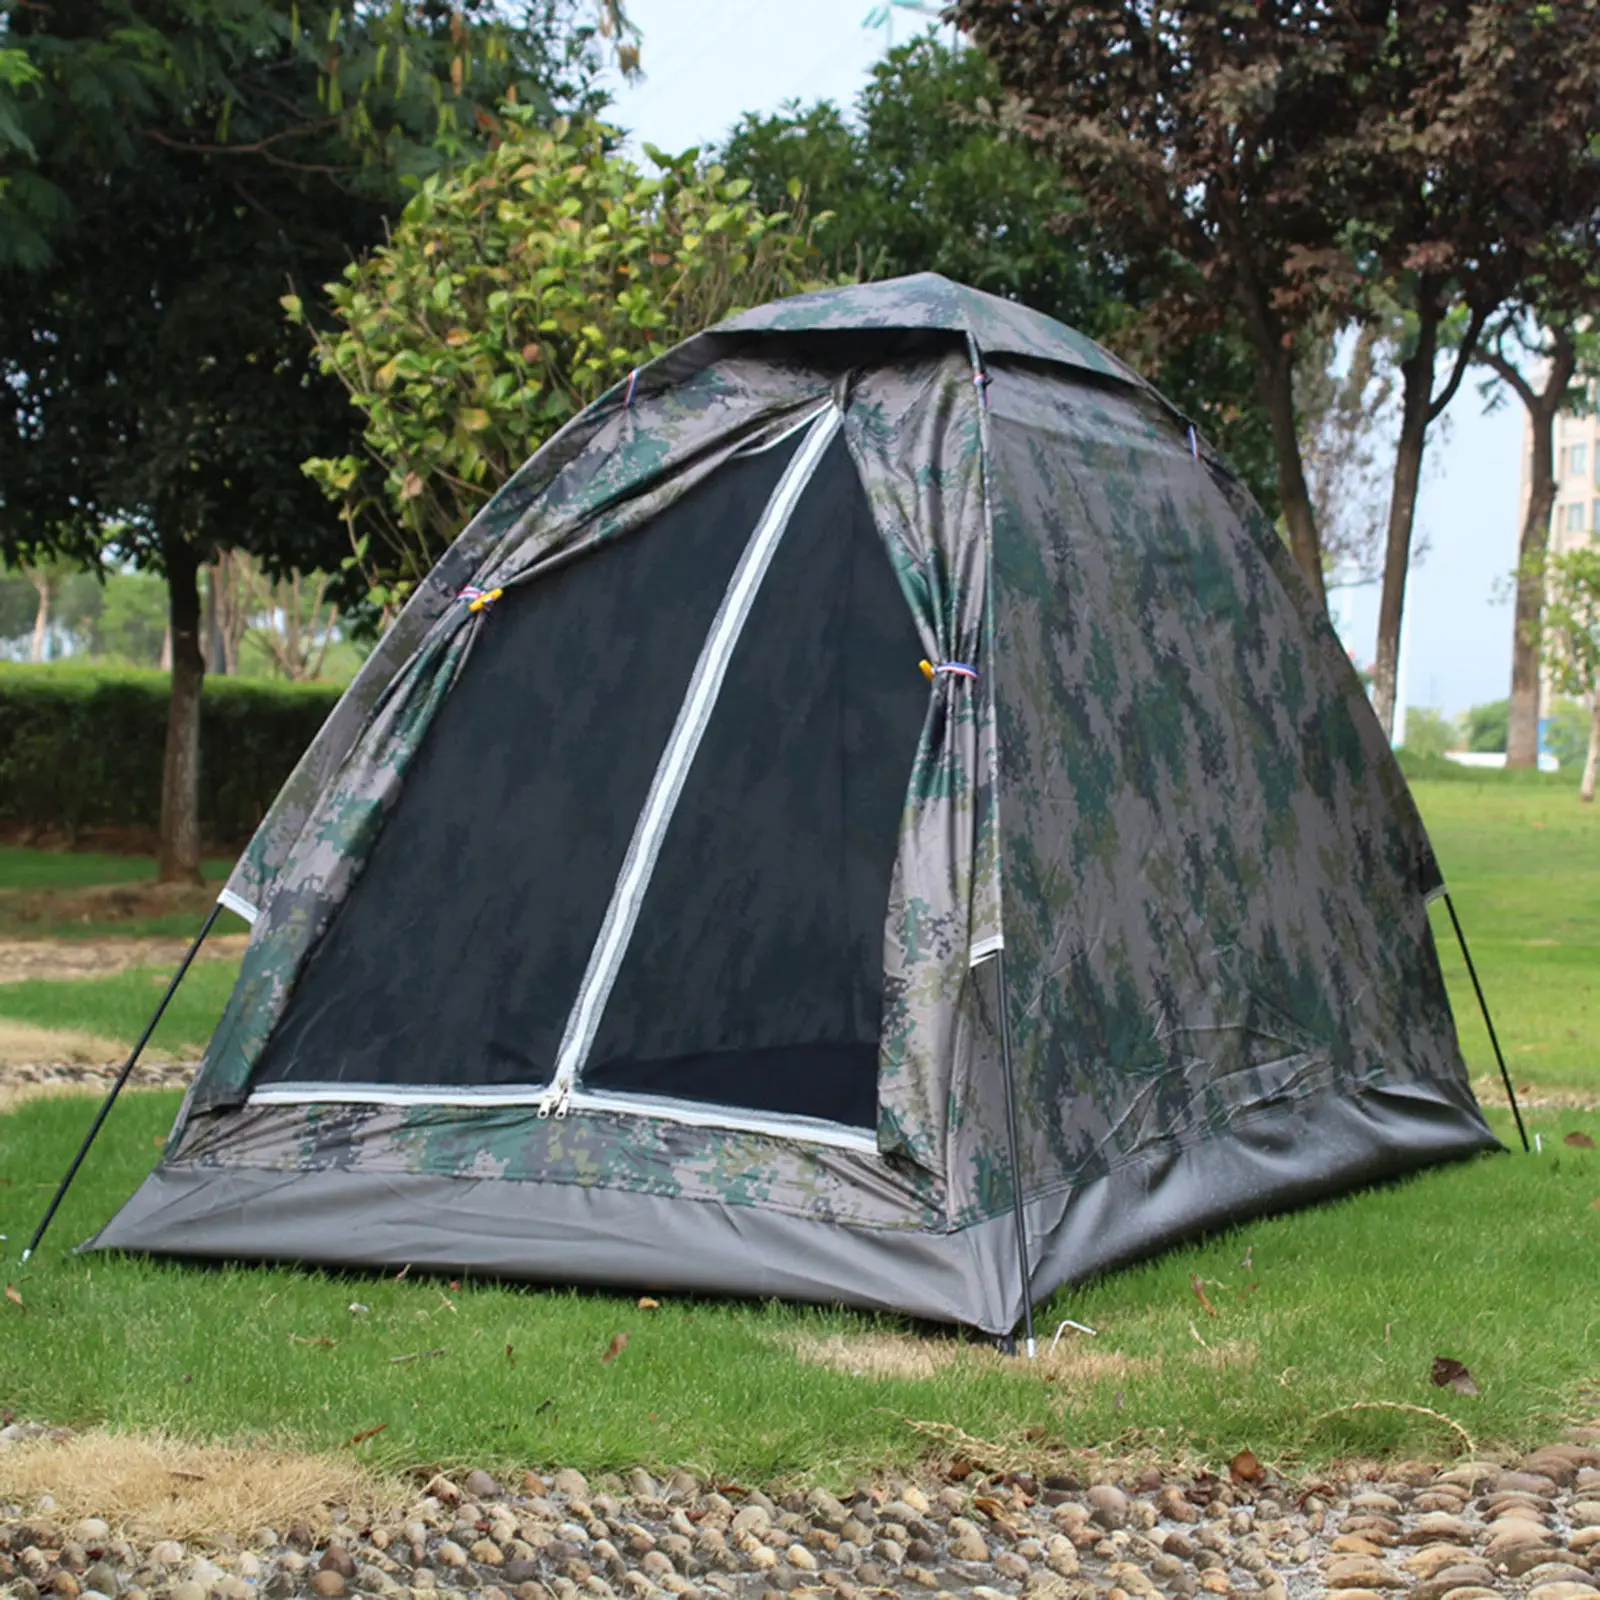 Portable Outdoor Camping Tent Camouflage 1/2 Person Tent Double Layer Waterproof Outdoor Hiking Traveling Camping Picnic Tent